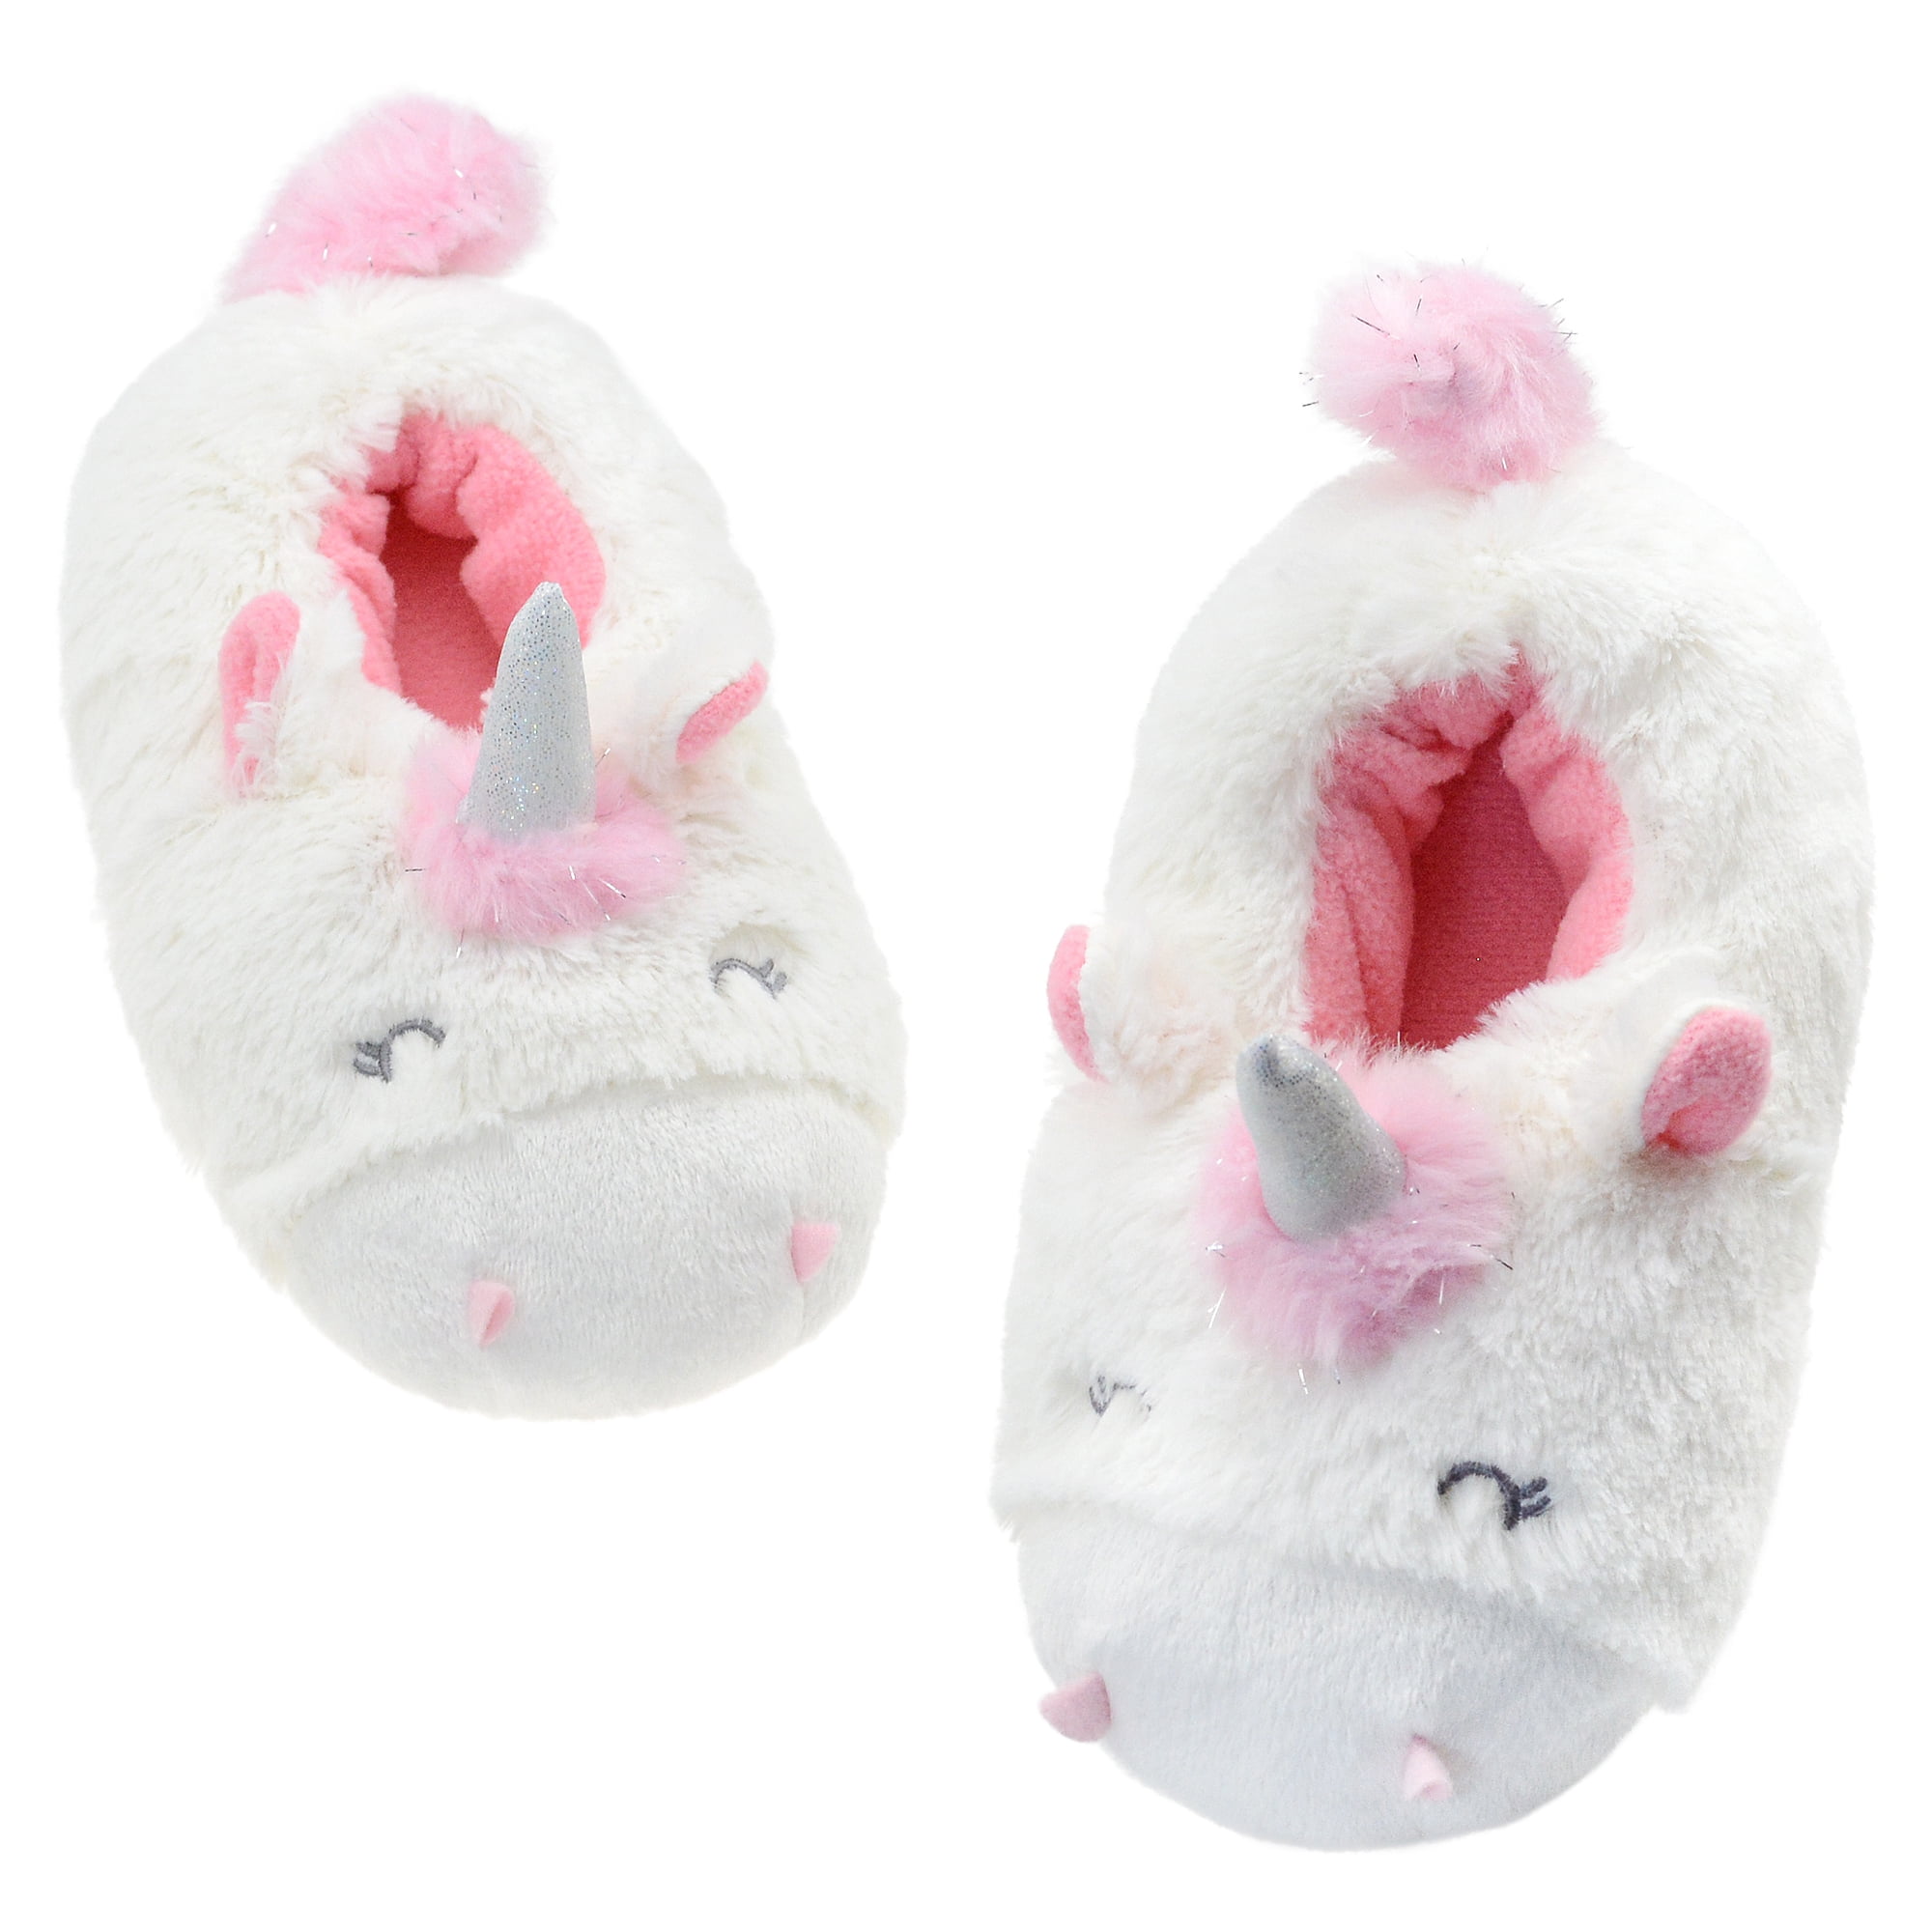 Boys Girls Cute Cartoon Animal Deer Unicorn Slippers Fuzzy Fur Lined Winter Warm House Slippers Non-Slip Indoor Outdoor Shoes for Toddler/Little Kids 